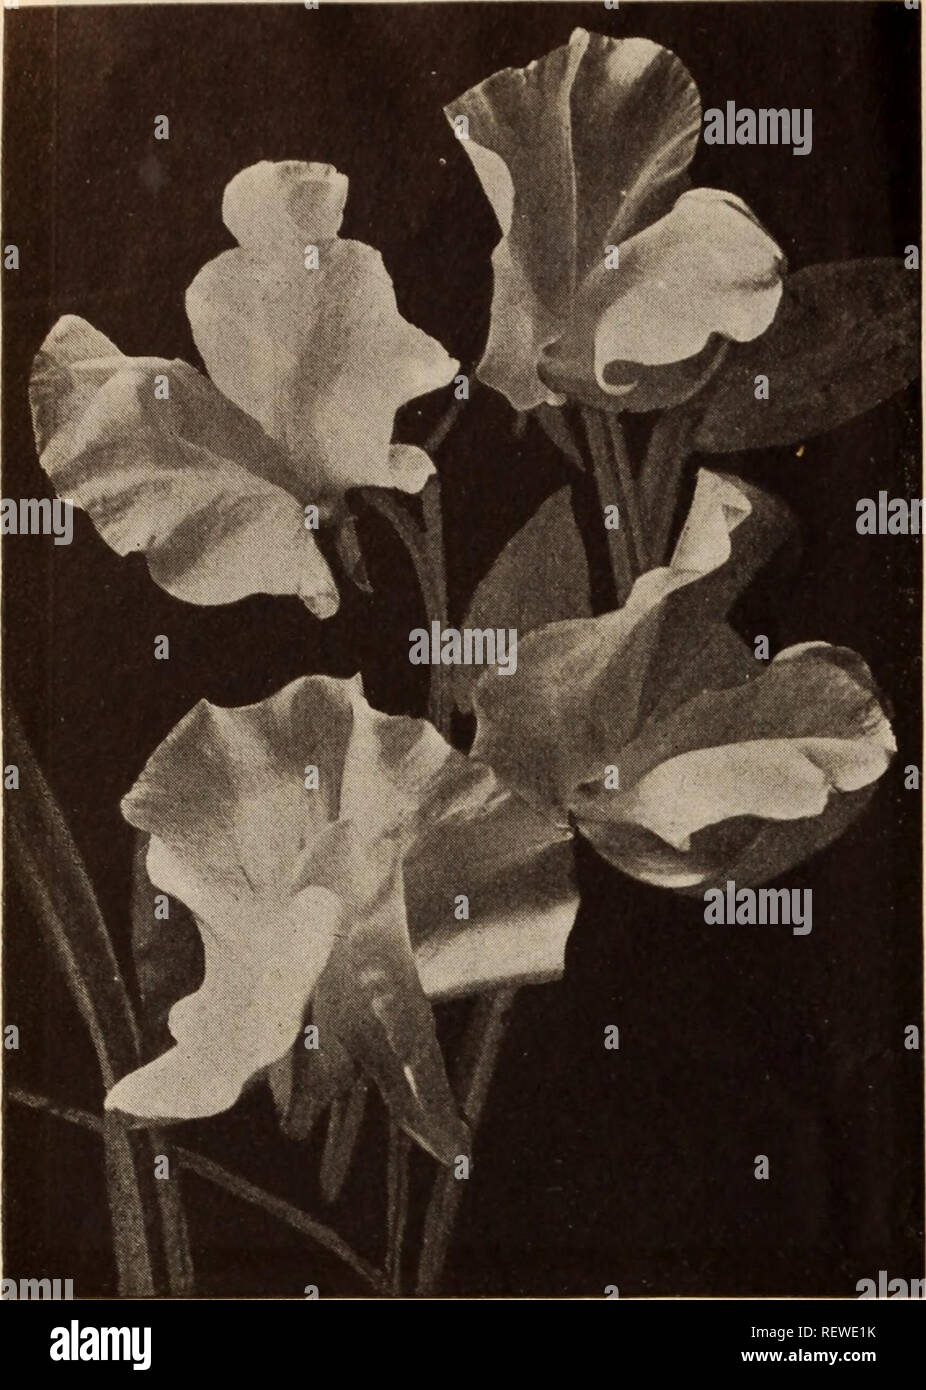 . Dreer's wholesale price list / Henry A. Dreer.. Nursery Catalogue. 48 HENRY A. DREER, PHILADELPHIA, PA., WHOLESALE PRICE LIST. ORCHID-FLOWERED SWEET PEA Schizanthus (Fringe Flower). Dwarf Larse-Flowerine Hybrids. Wisetonensis. Fine for pots . - Mixed. Tr. Pkt. Oz. 25 $1 00 30 1 50 Smilax. Every florist should grow some of this; always needed. Seed we offer is of new crop and of high germination. Tr. pkt., 10 cts.; Â«2., 35 cts.; V^-lb., $1.00. Stocks (Gilliflower). Our supply of this important item is grown for us by the fore- most European expert and higher quality can not be procured. Vari Stock Photo